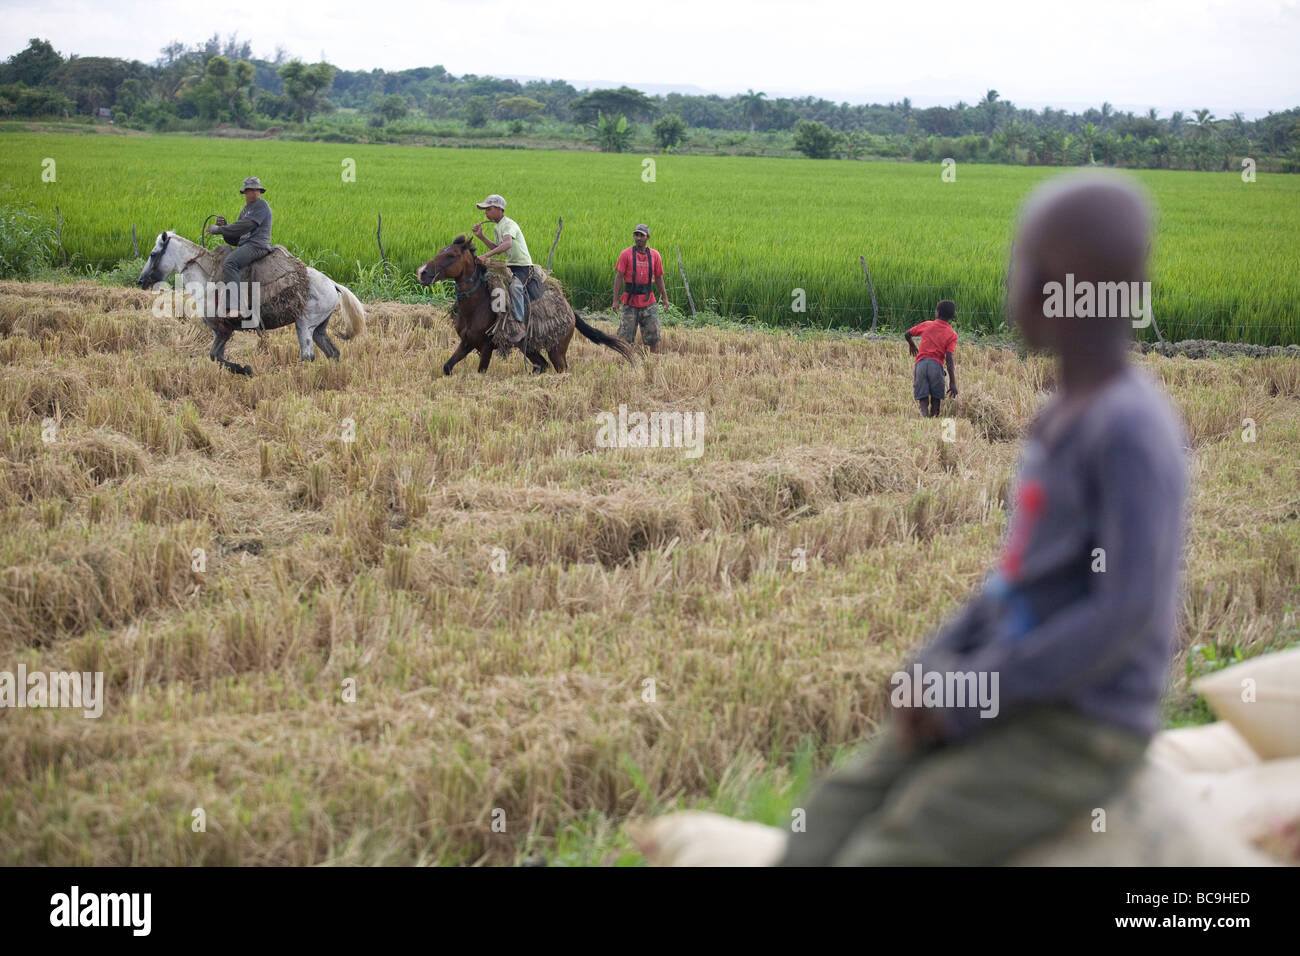 Young men and boys harvest a field, Dominican Republic Stock Photo